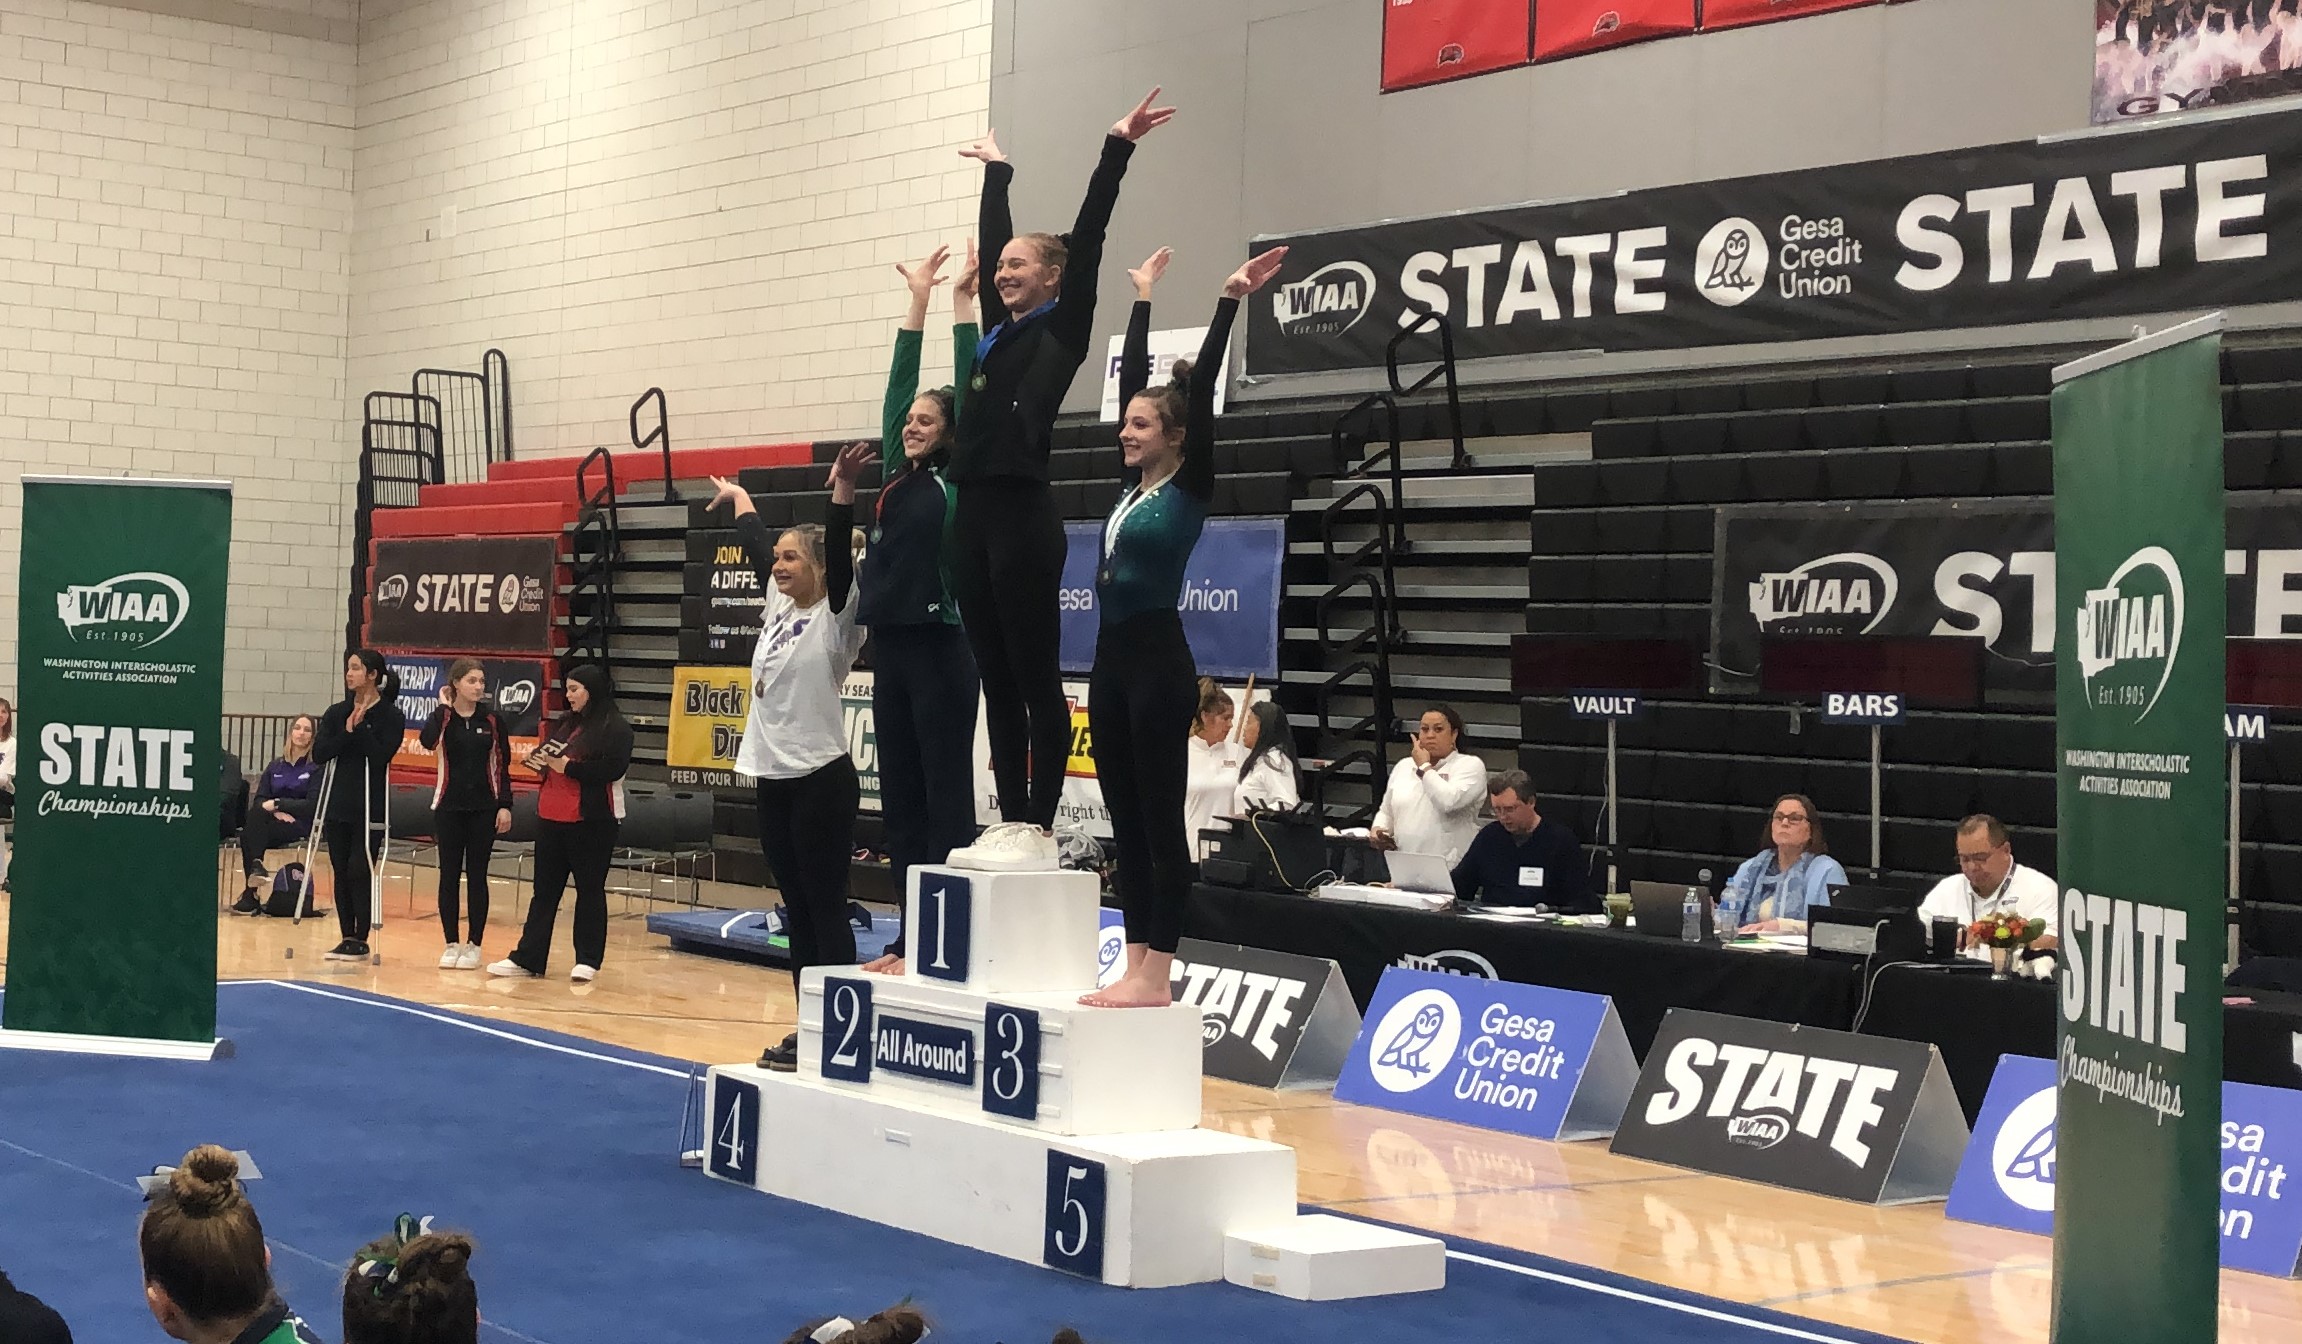 Camas junior Madi Williams stands atop to podium after winning the Class 4A all-around title at the WIAA State Gymnastics Championships on Friday, Feb. 24, 2023 at Sammamish High School in Bellevue.